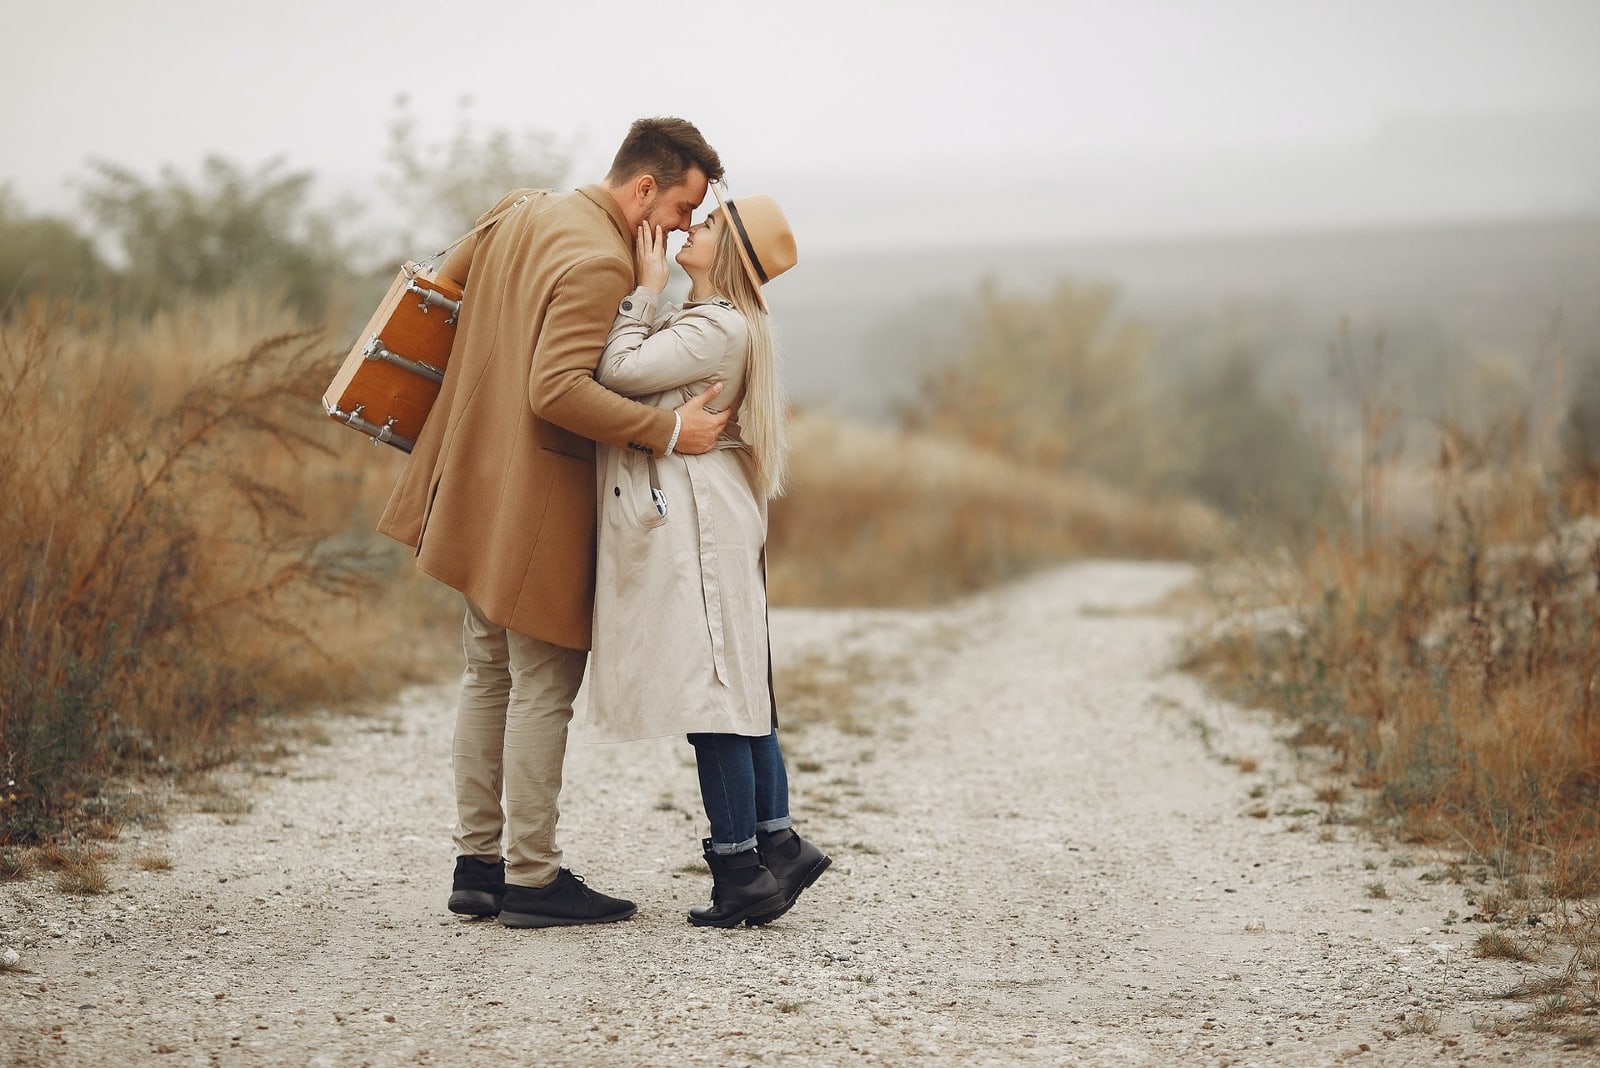 man and woman about to kiss while standing on rural path